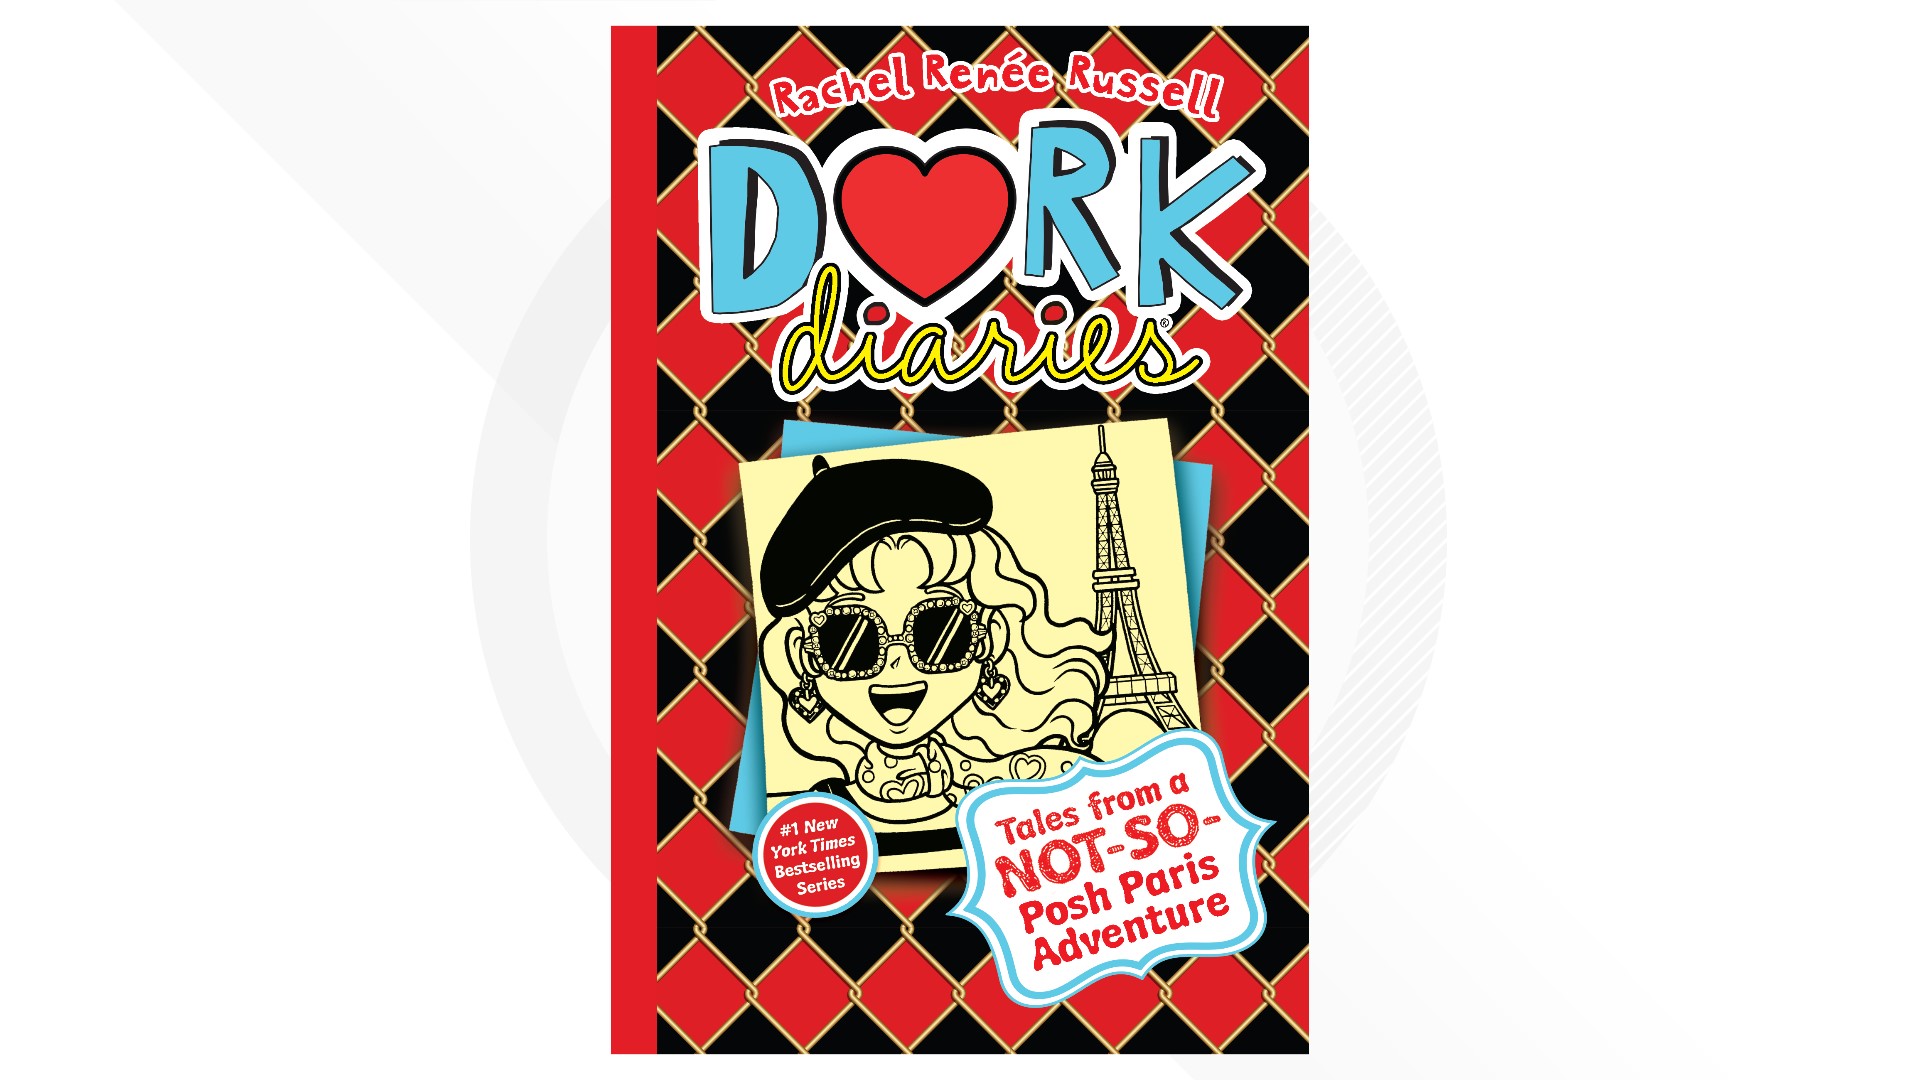 Author Rachel Renée Russell and her daughter, Nikki Russell tell us about the inspiration behind 'The Dork Diaries'. They also share what to expect from the new book